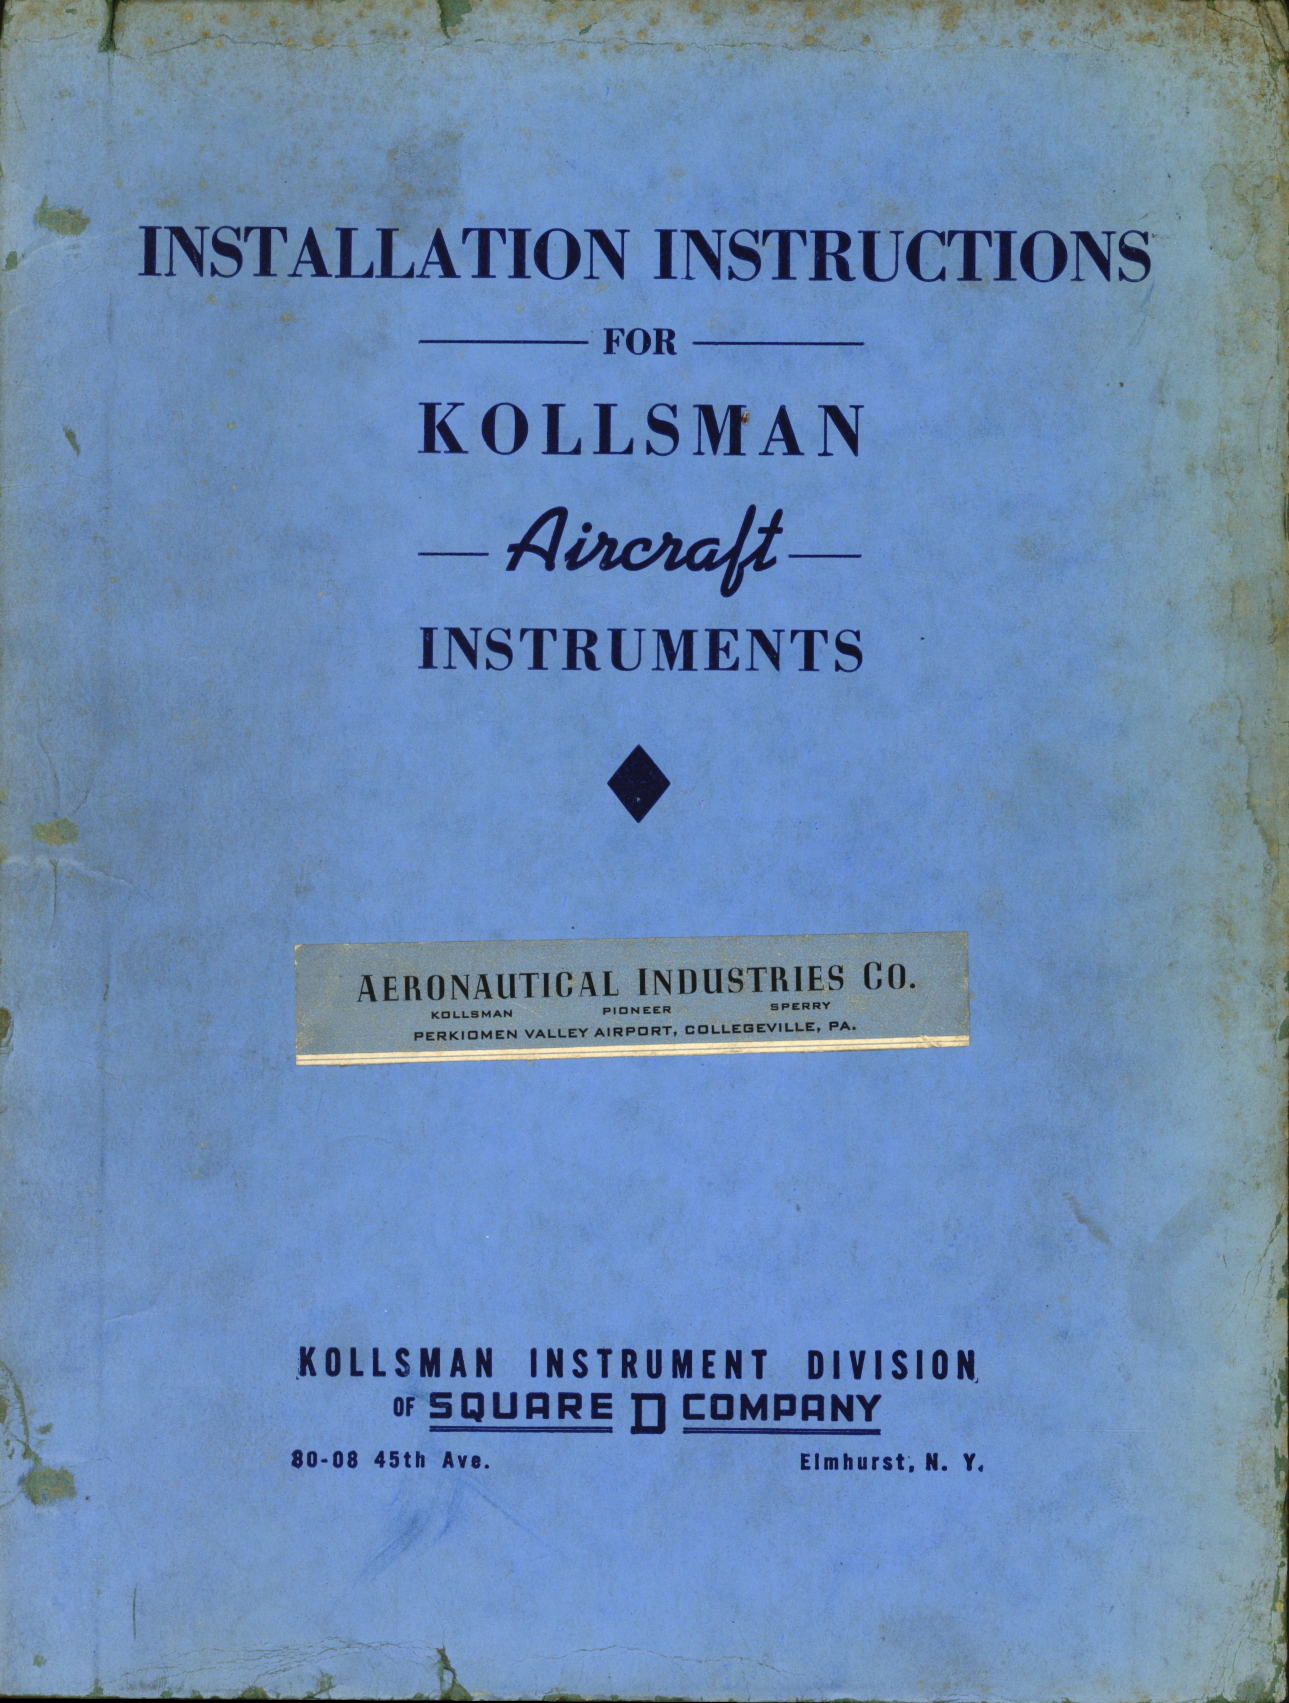 Sample page 1 from AirCorps Library document: Installation Instructions for Kollsman Aircraft Instruments